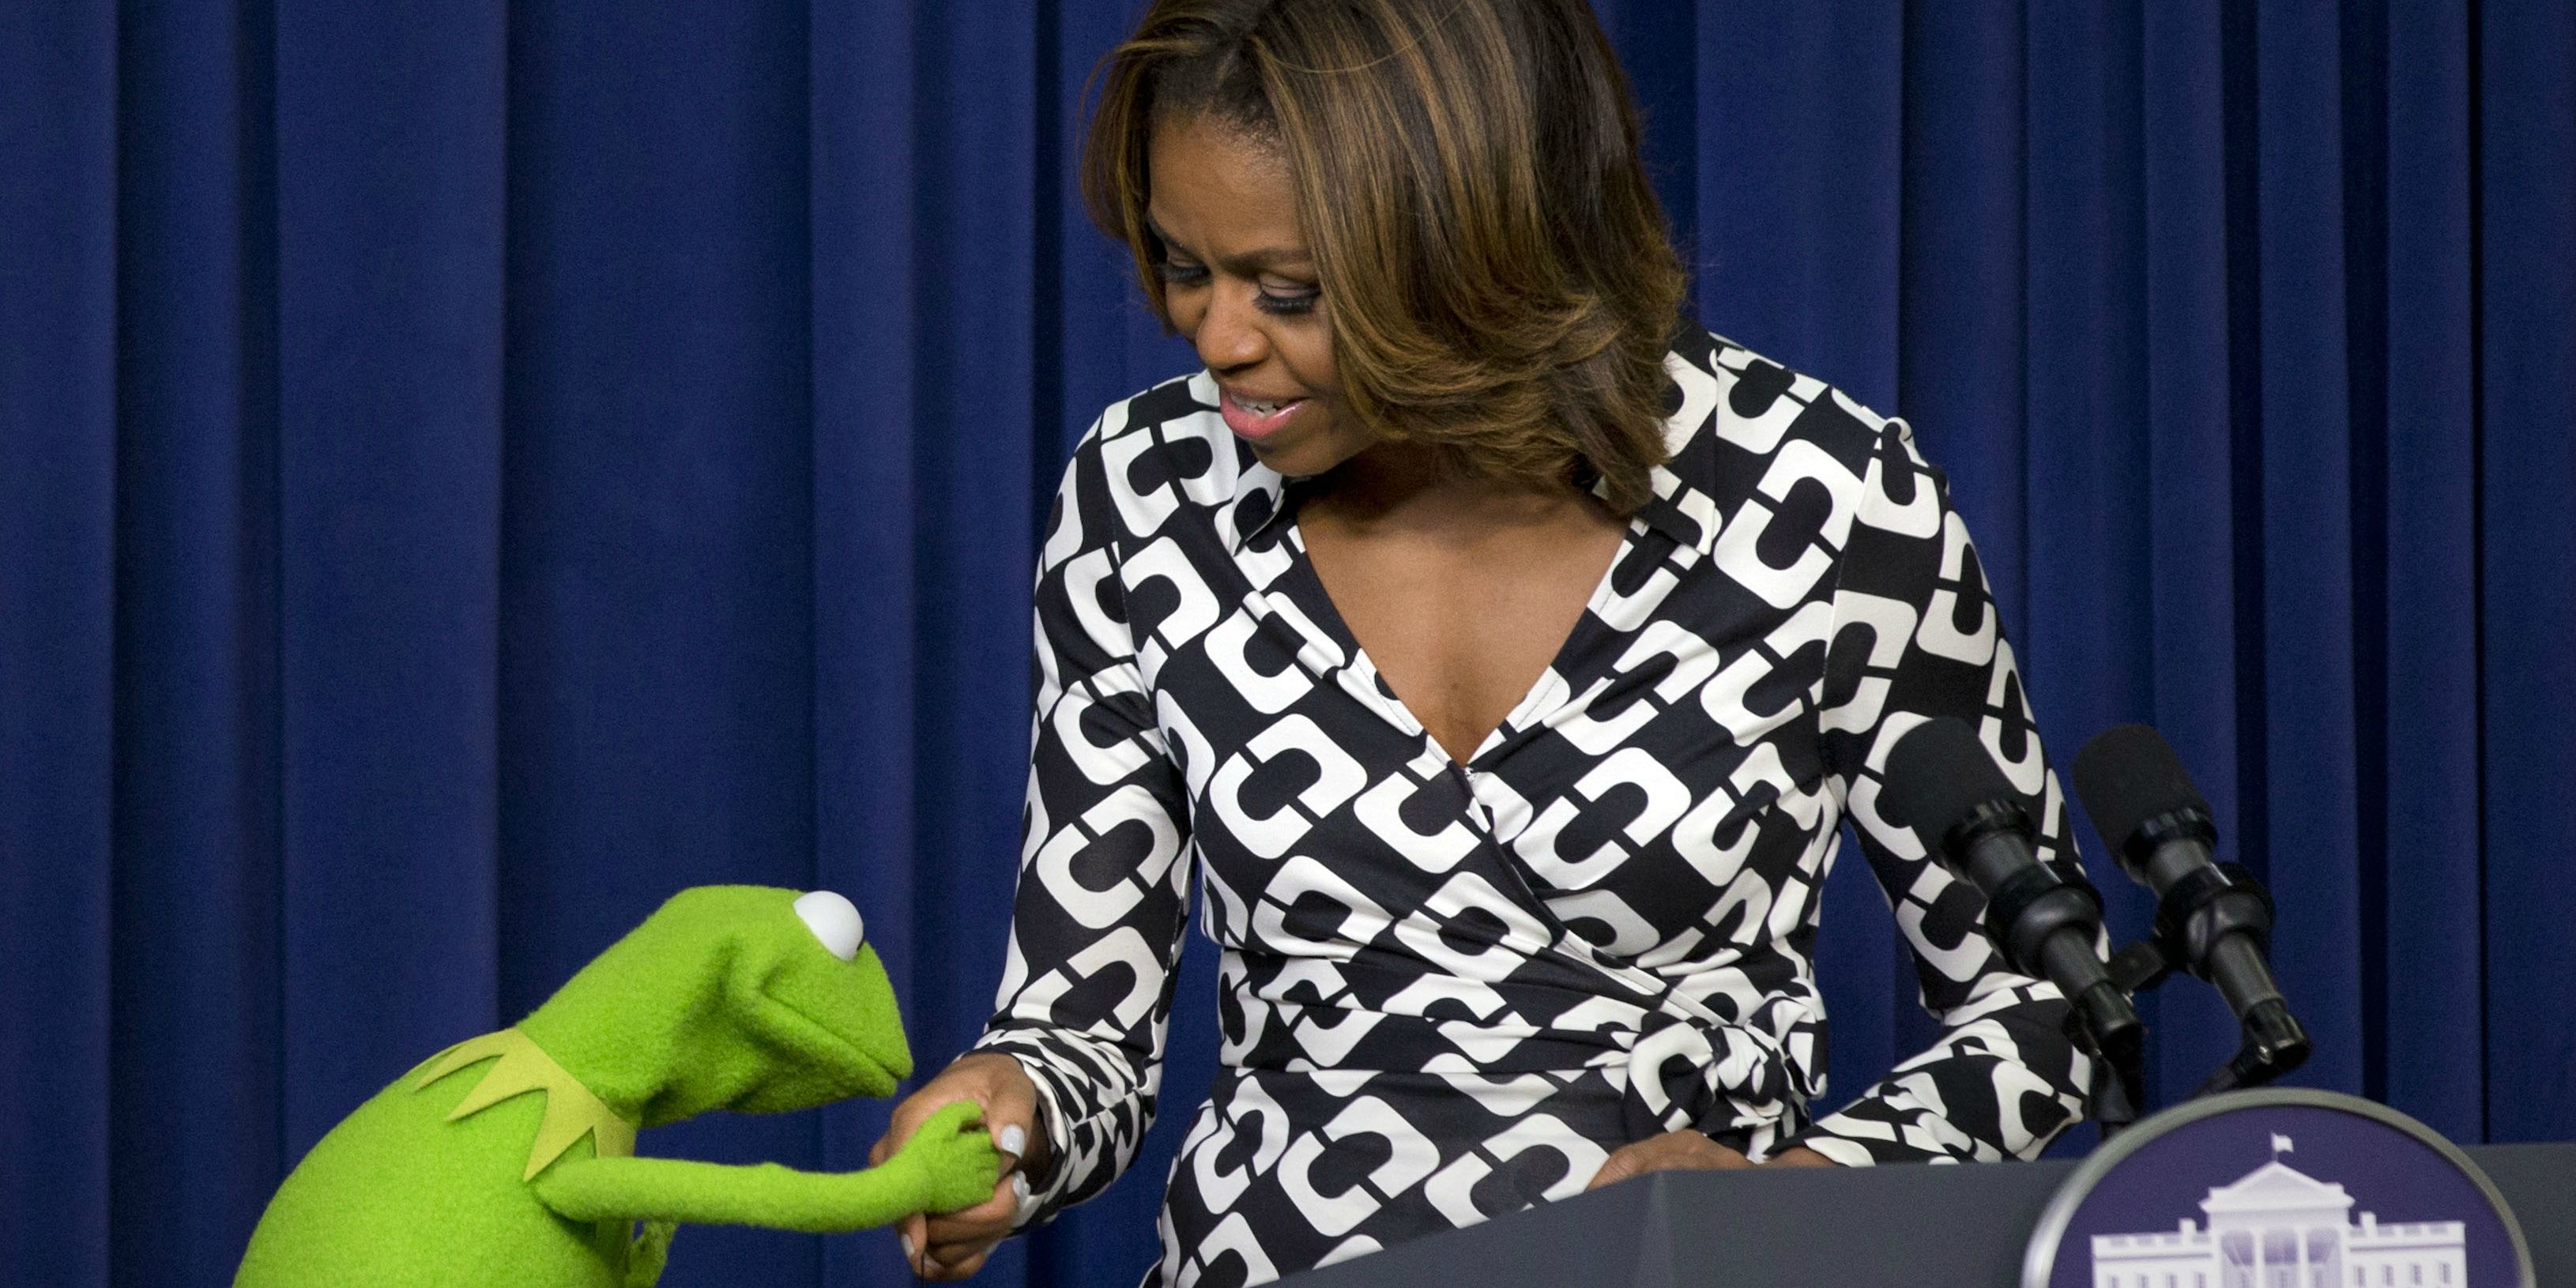 Kermit the Frog shaking hands with Michelle Obama